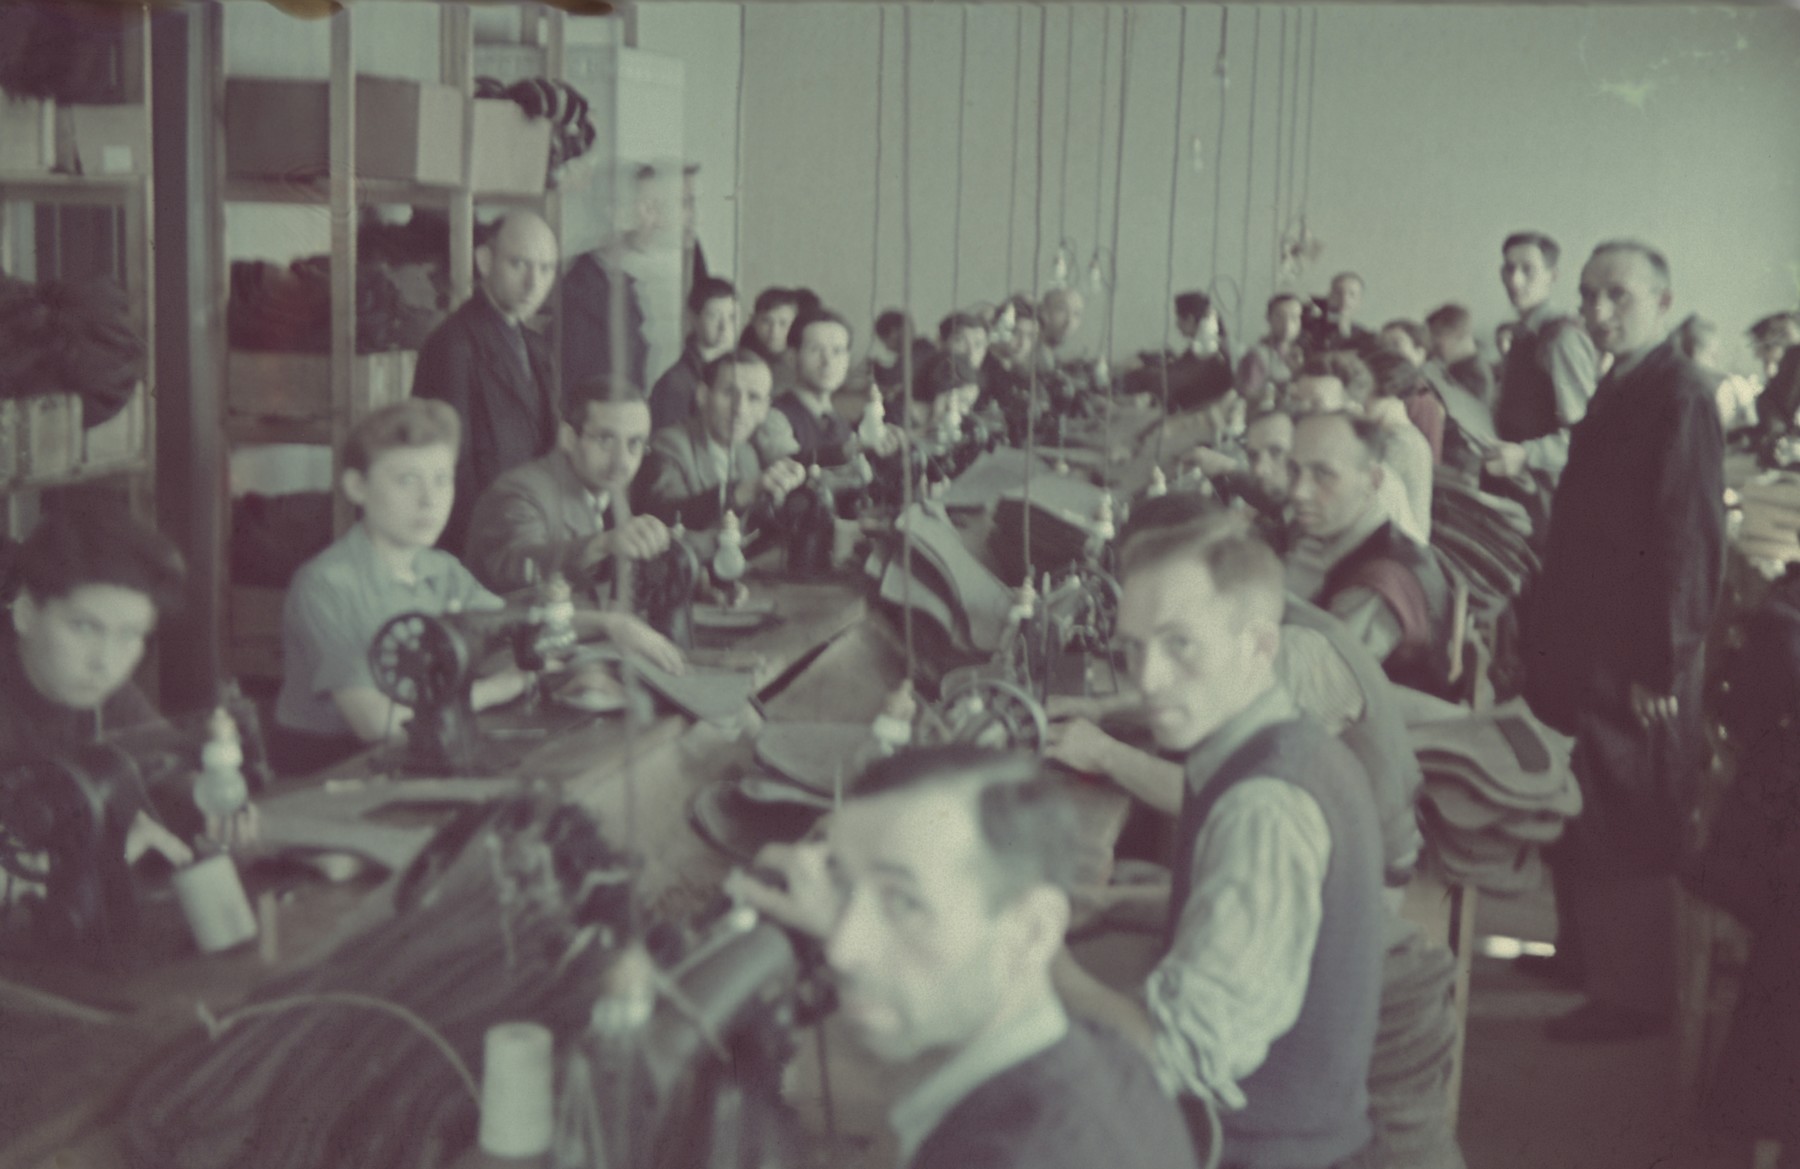 Workers operate sewing machines in the saddle-making workshop of the Lodz ghetto.

Original German caption: "Litzmannstadt-Getto, Sattlerei" (saddlery).